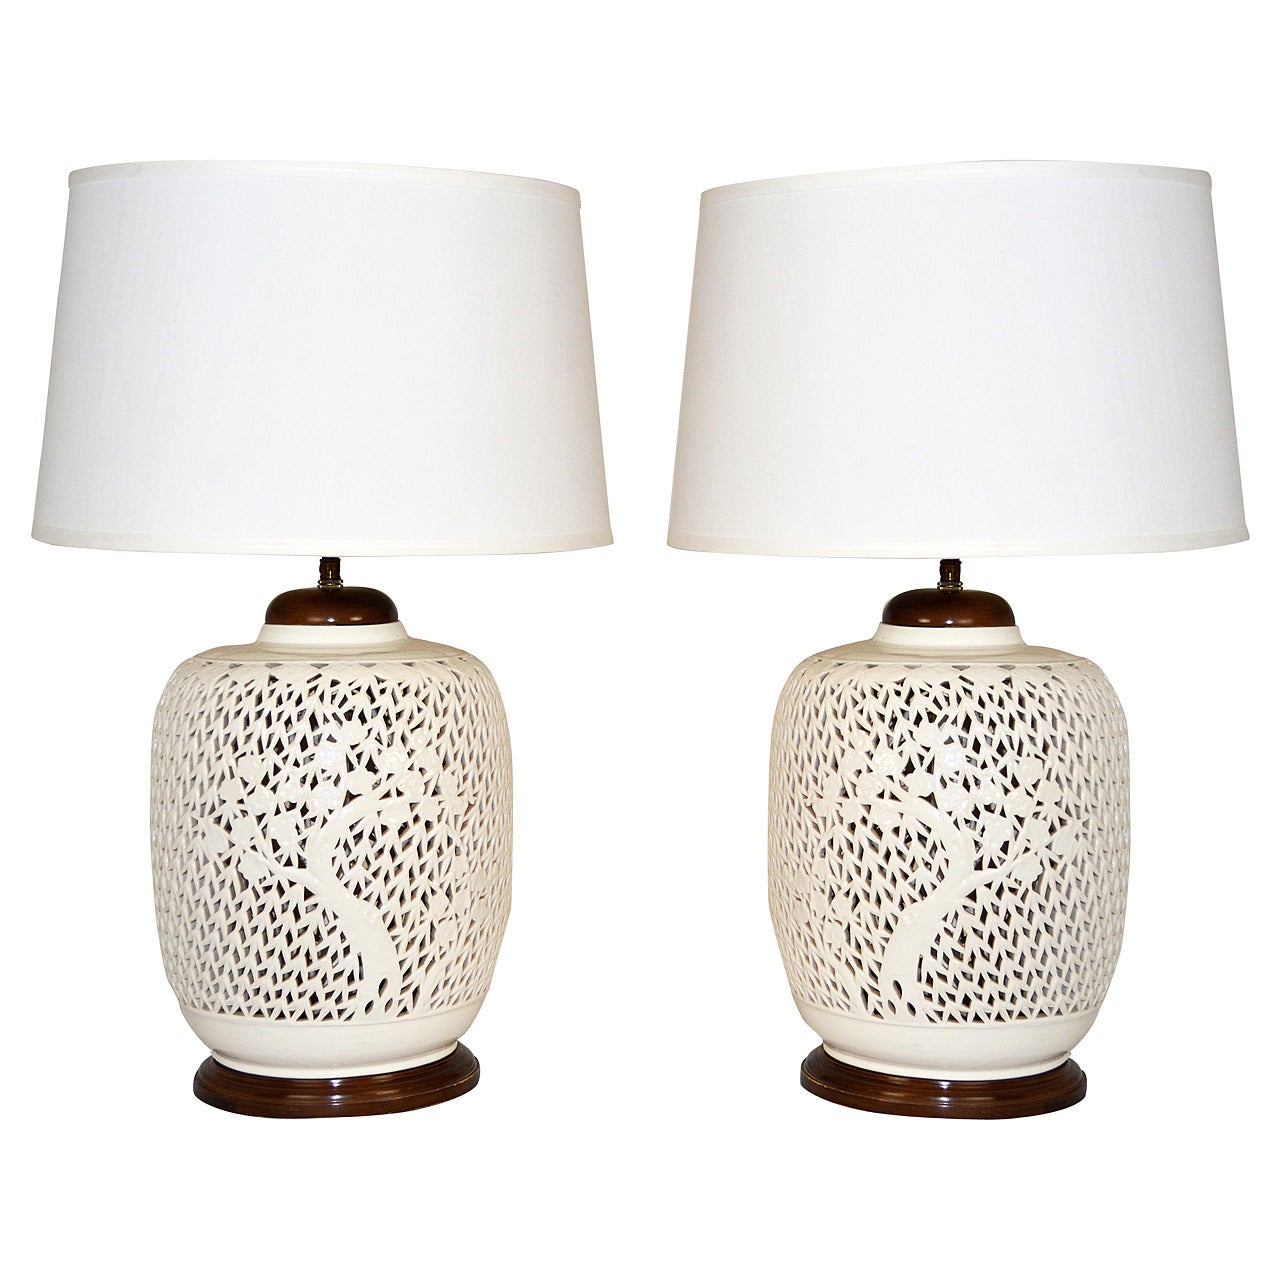 Pair of Reticulated Porcelain Blanc de Chine Lamps